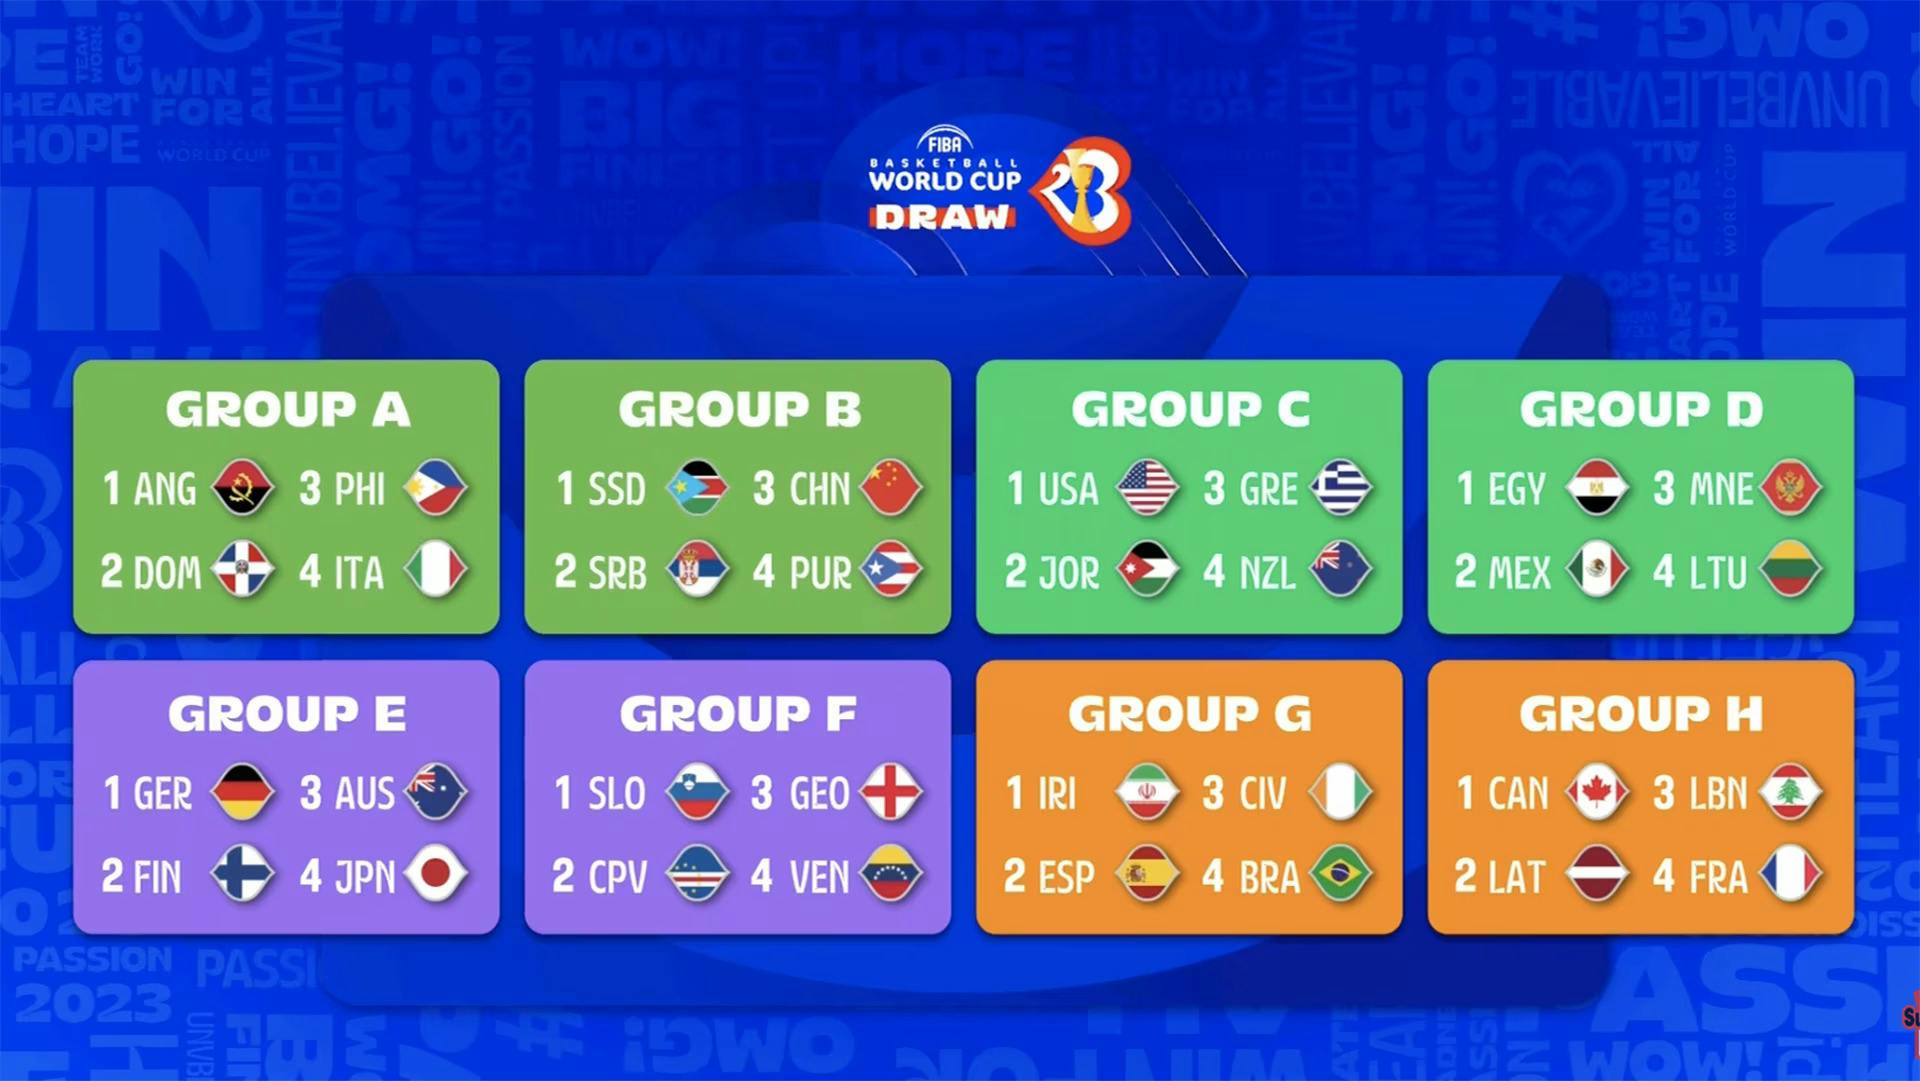 FIBA World Cup 2023 country groupings, lettered from A-H with four teams each. 